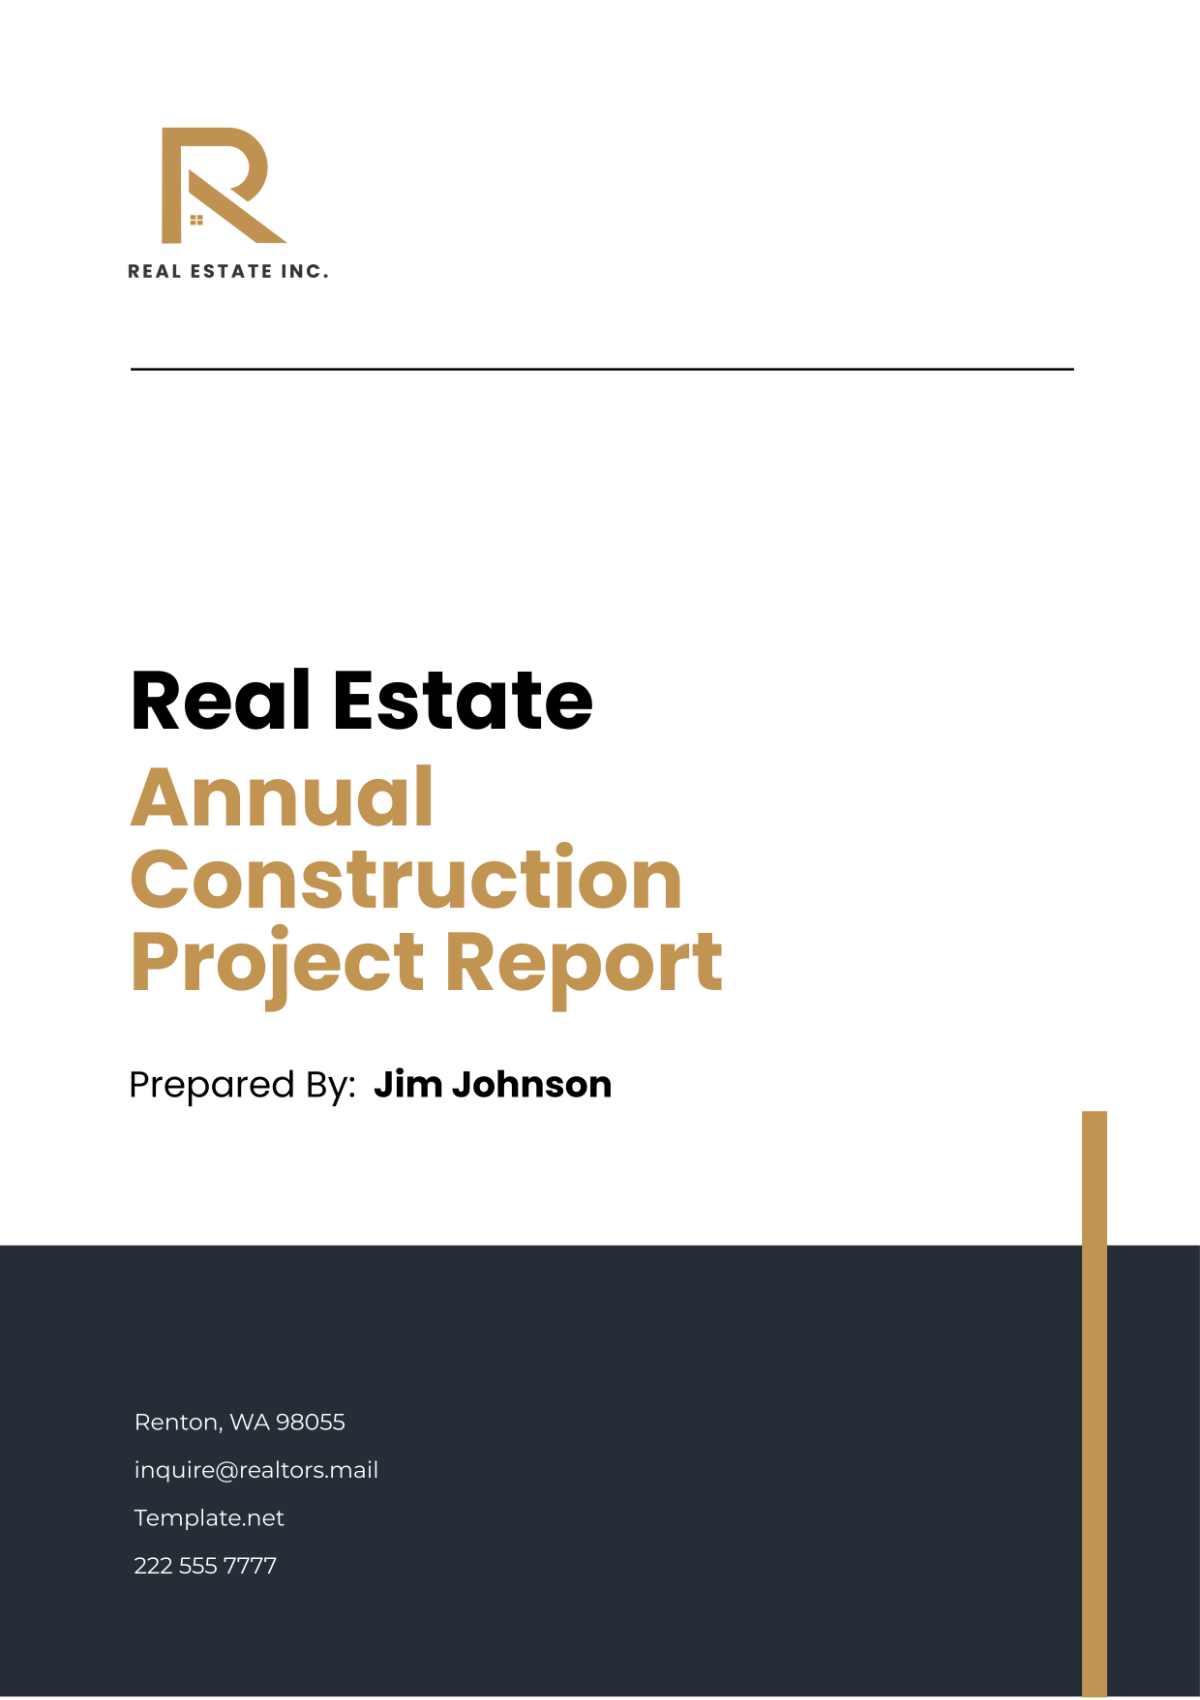 Real Estate Annual Construction Project Report Template